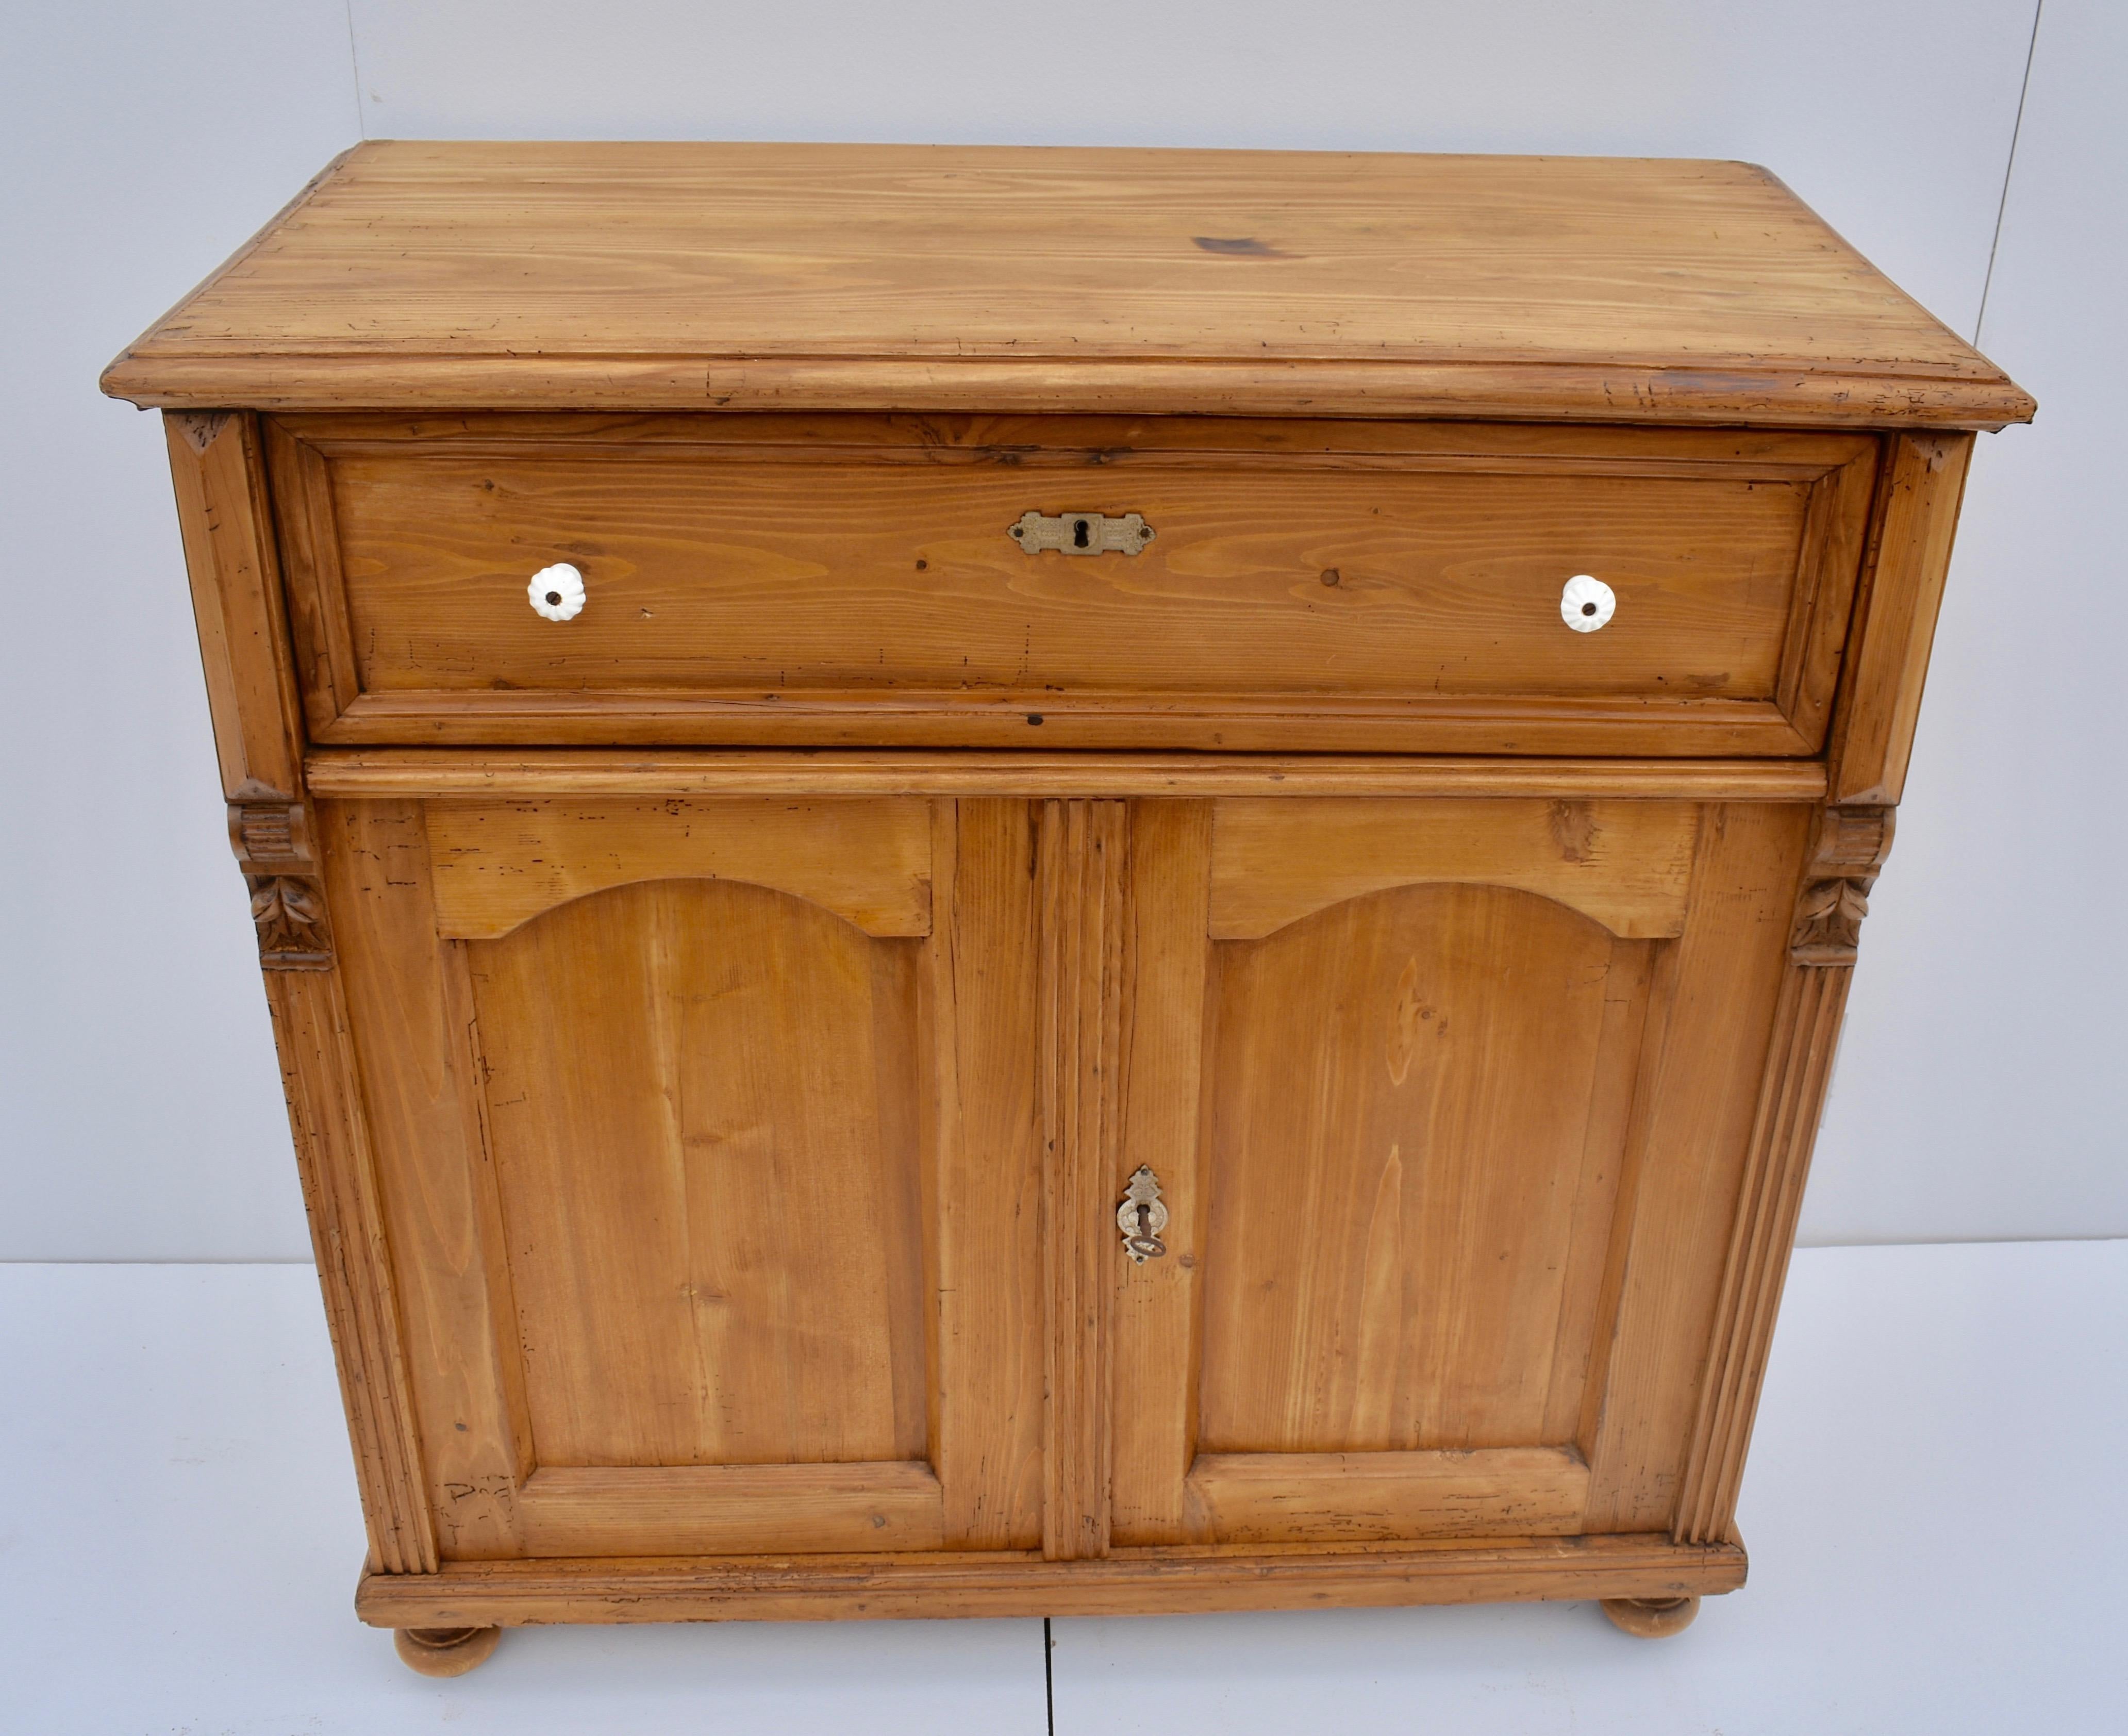 This is a fairly large two-door dresser base, very attractive with a great honey pine color. The top has a step-down routed edge and shows nicely executed exposed dovetails. It has a single long handcut dovetailed drawer, above two arched